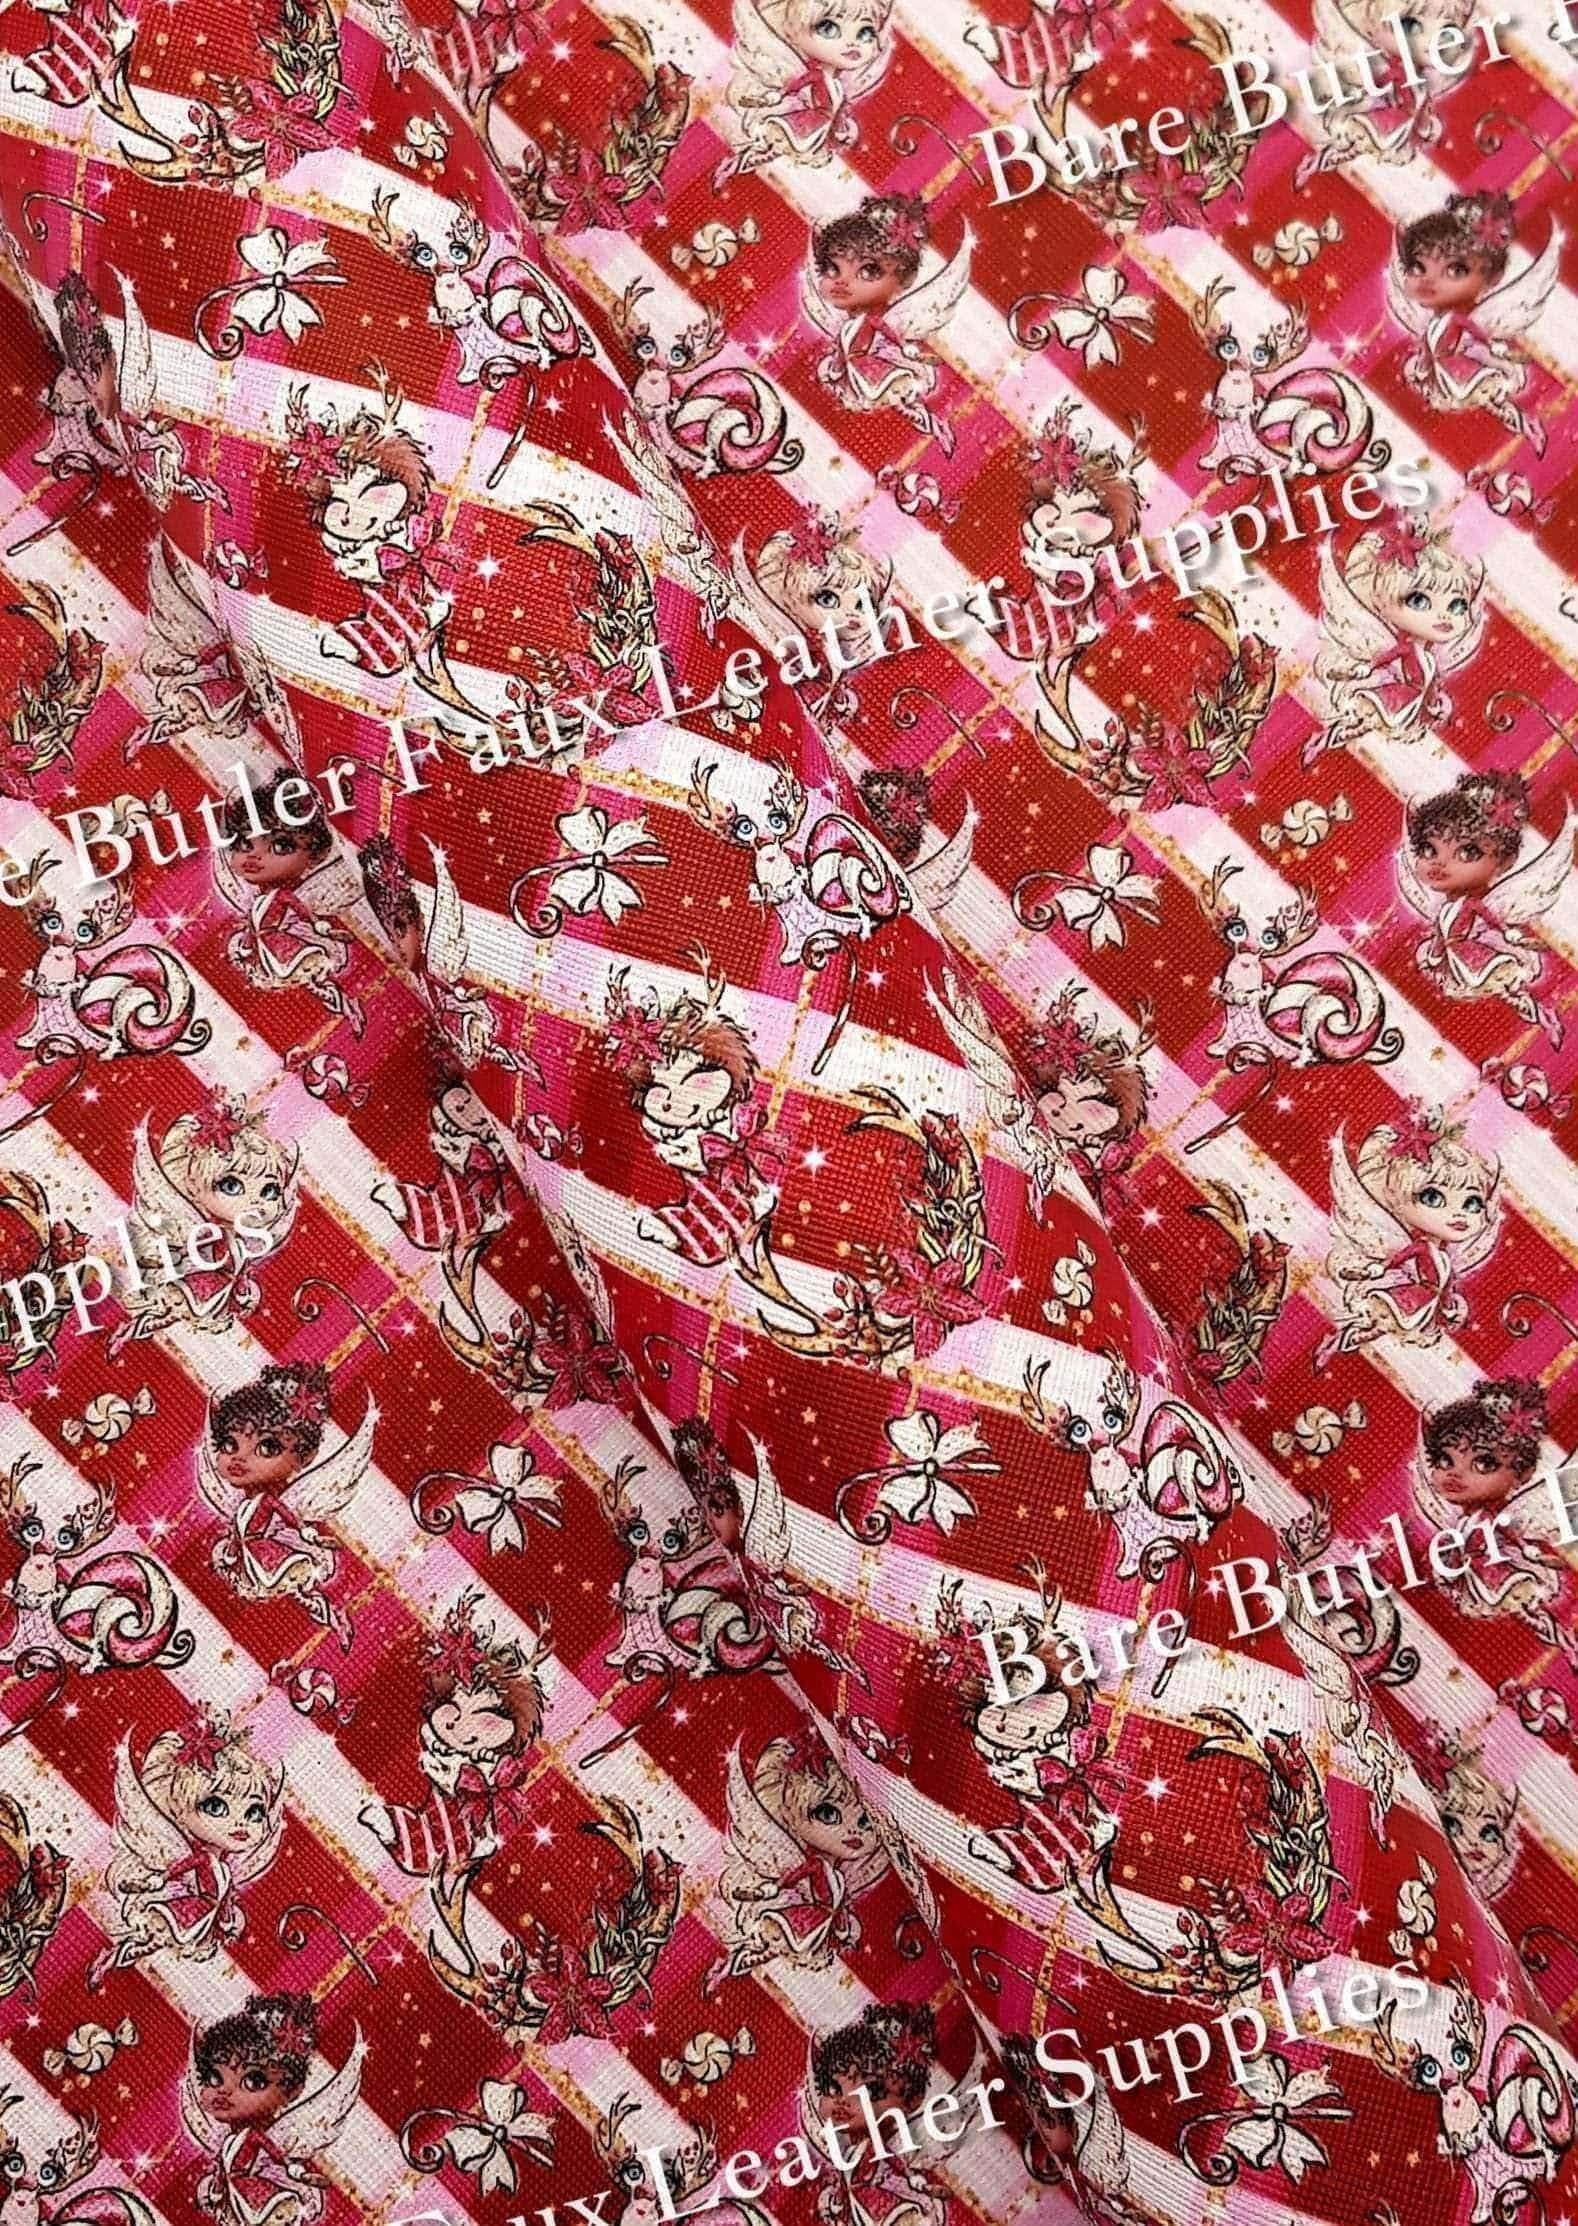 Christmas - Christmas Fairies Red - Christmas, Fairies, Faux, Faux Leather, Leather, leatherette, RED - Bare Butler Faux Leather Supplies 